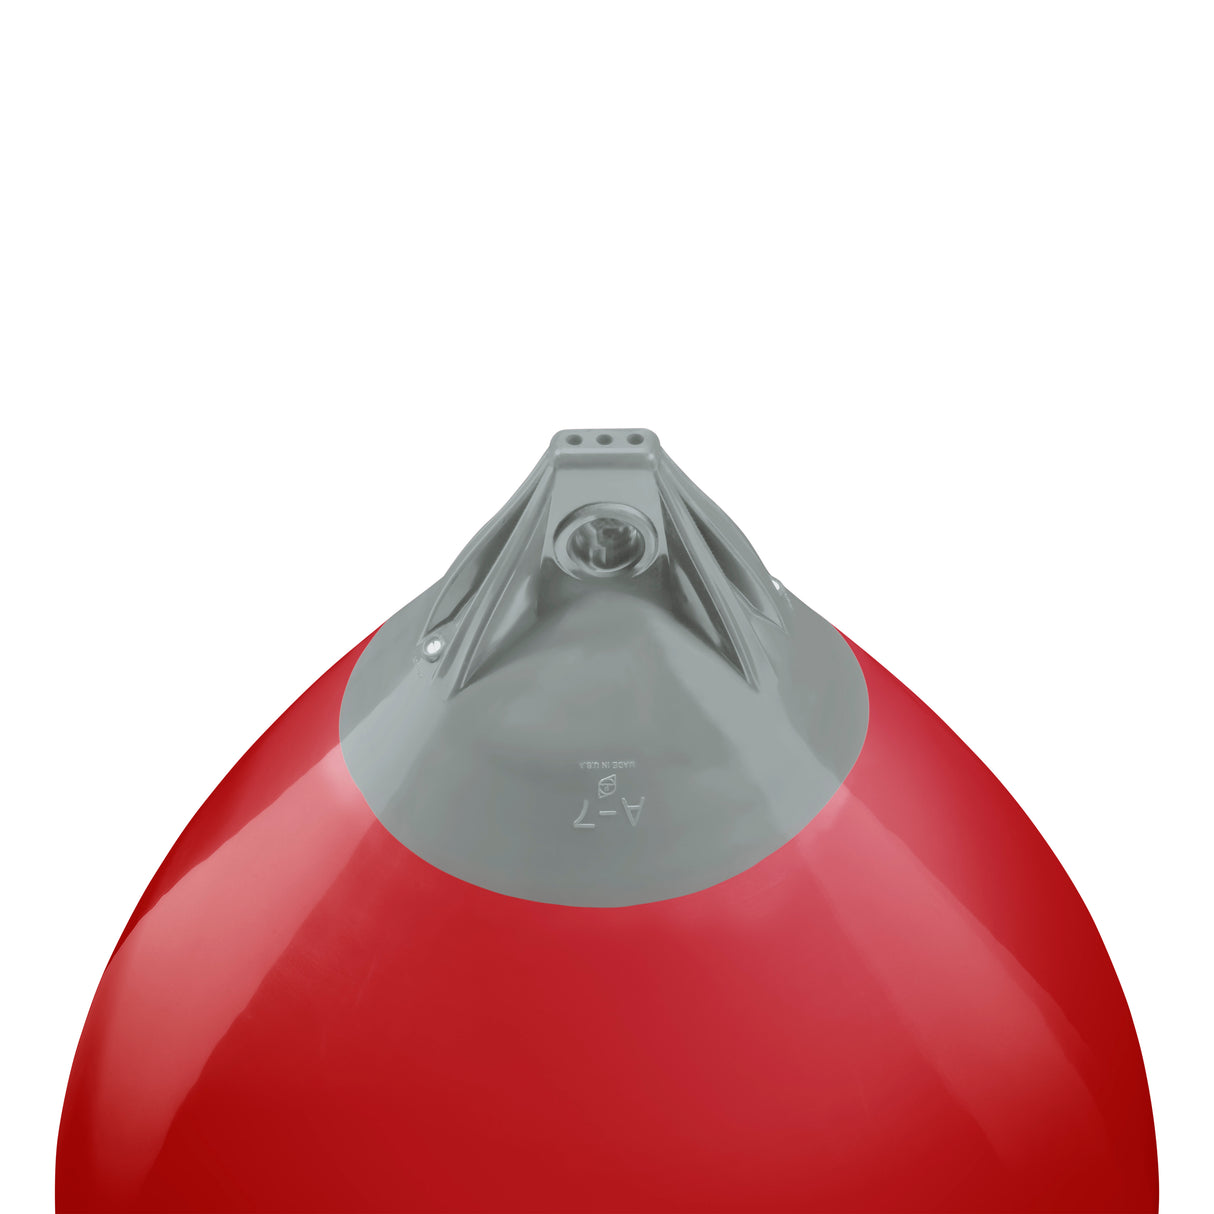 Classic Red buoy with Grey-Top, Polyform A-7 angled shot